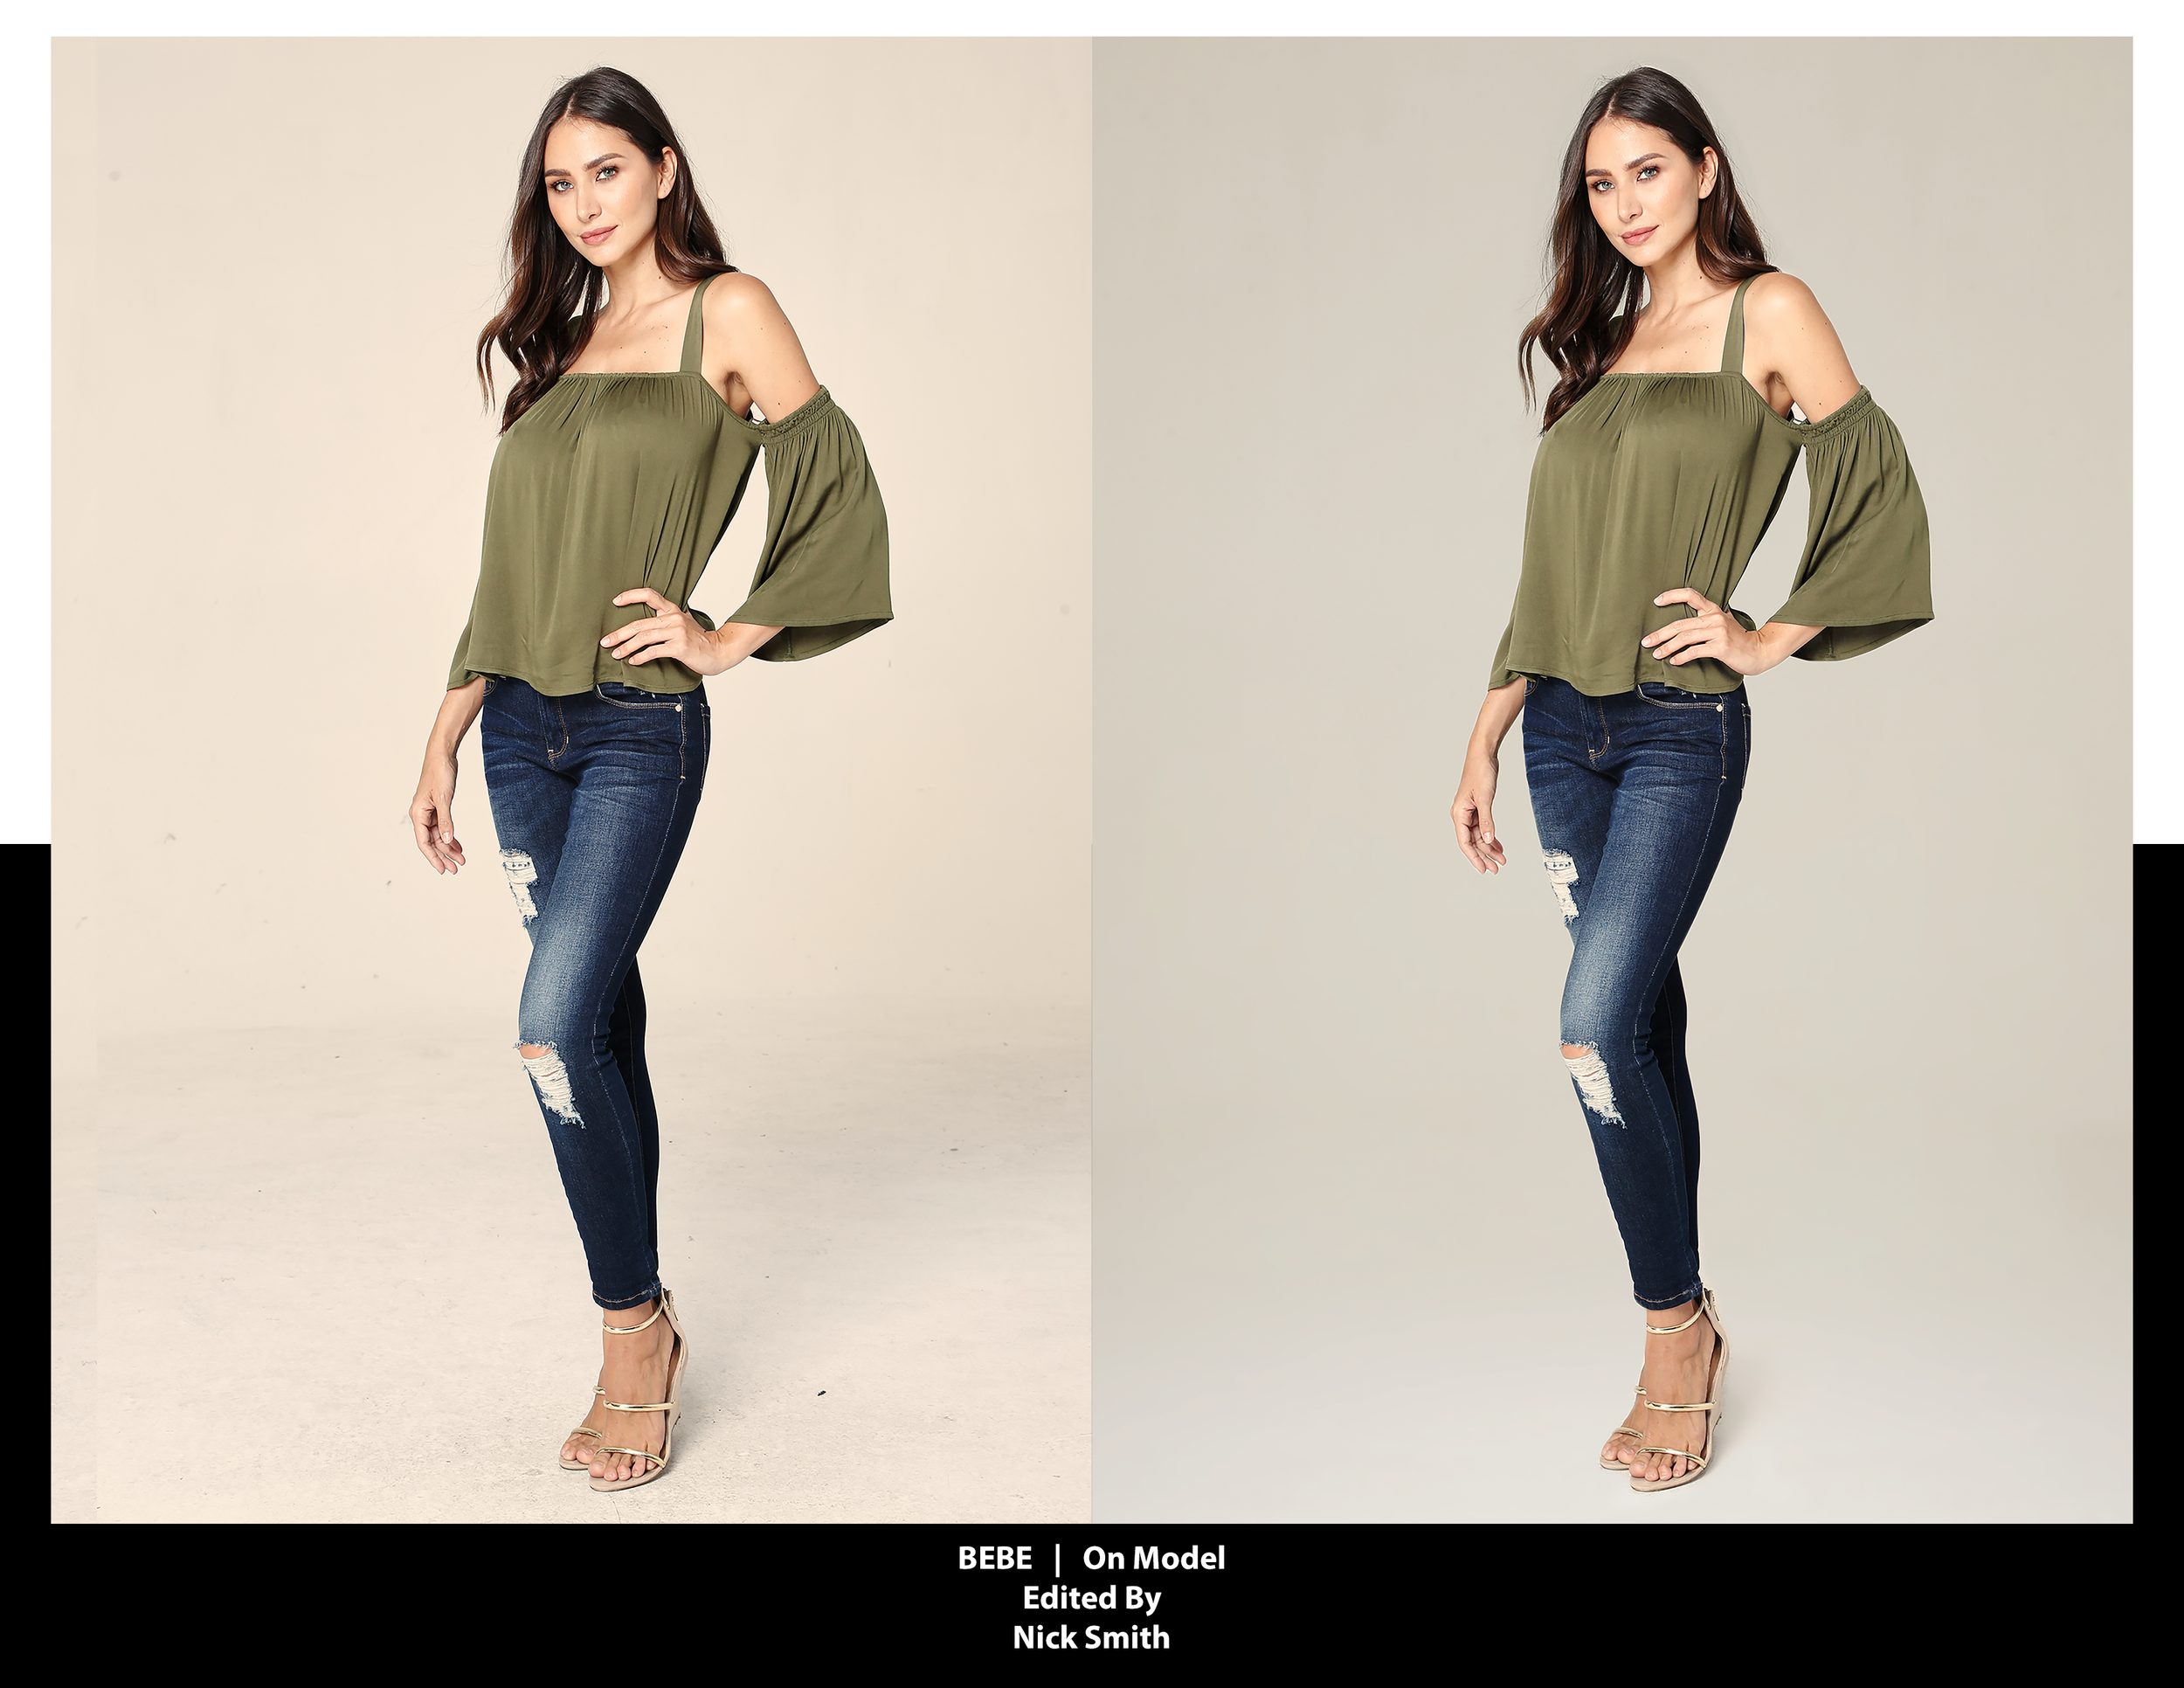 BEBE+model+jeans+nick+smith+editor+ecommerce+photography.png